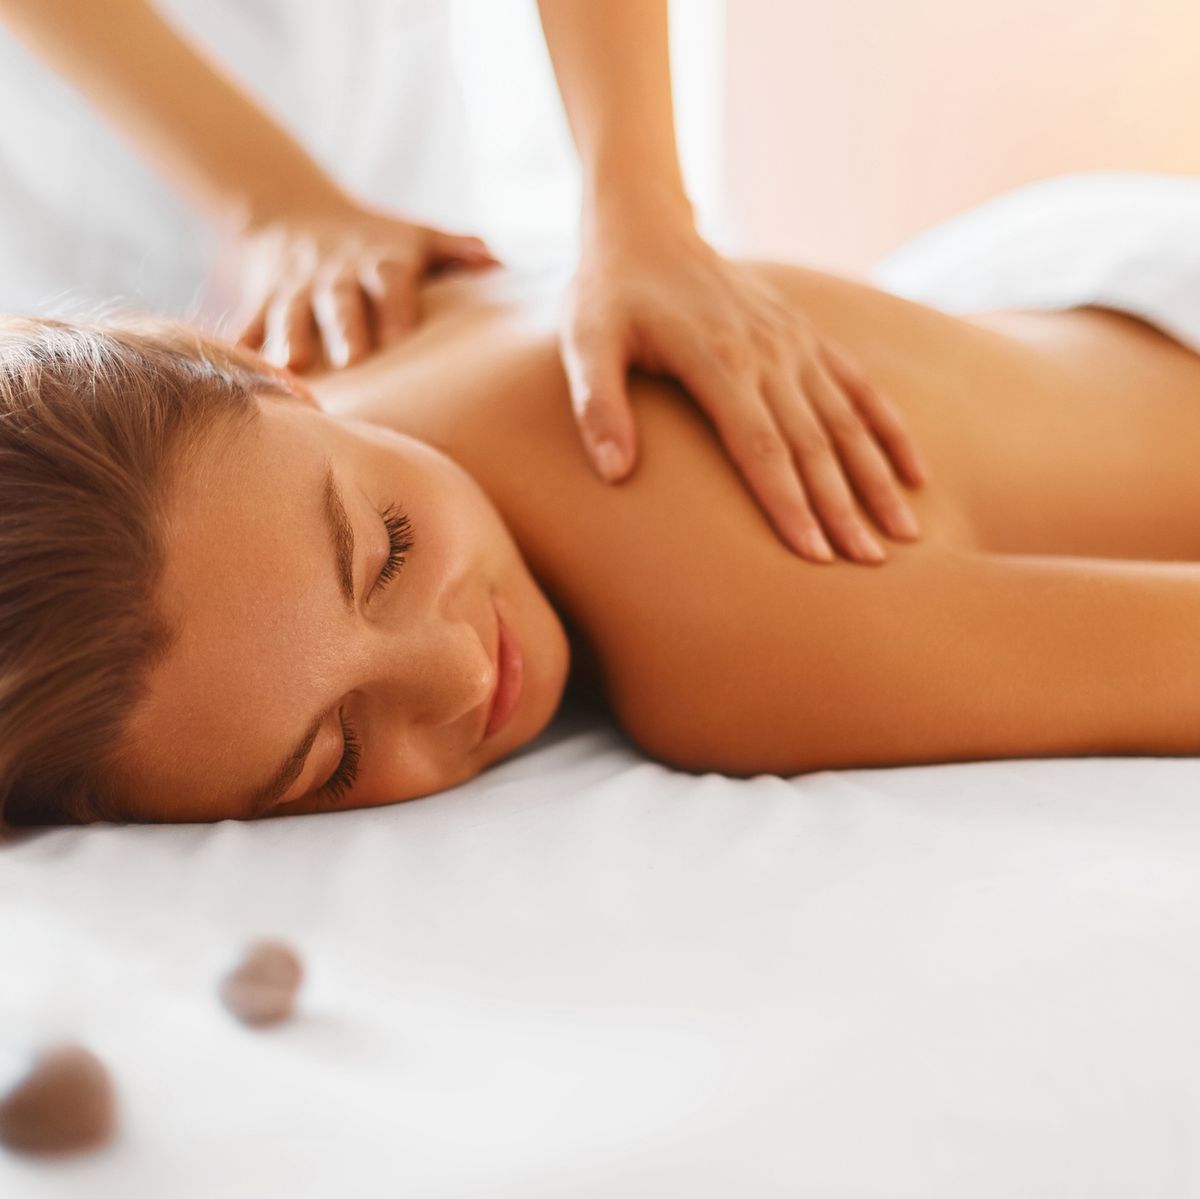 https://hips.hearstapps.com/hmg-prod/images/spa-woman-female-enjoying-massage-in-spa-centre-royalty-free-image-492676582-1549988720.jpg?crop=0.659xw:0.988xh;0.0337xw,0.00240xh&resize=1200:*